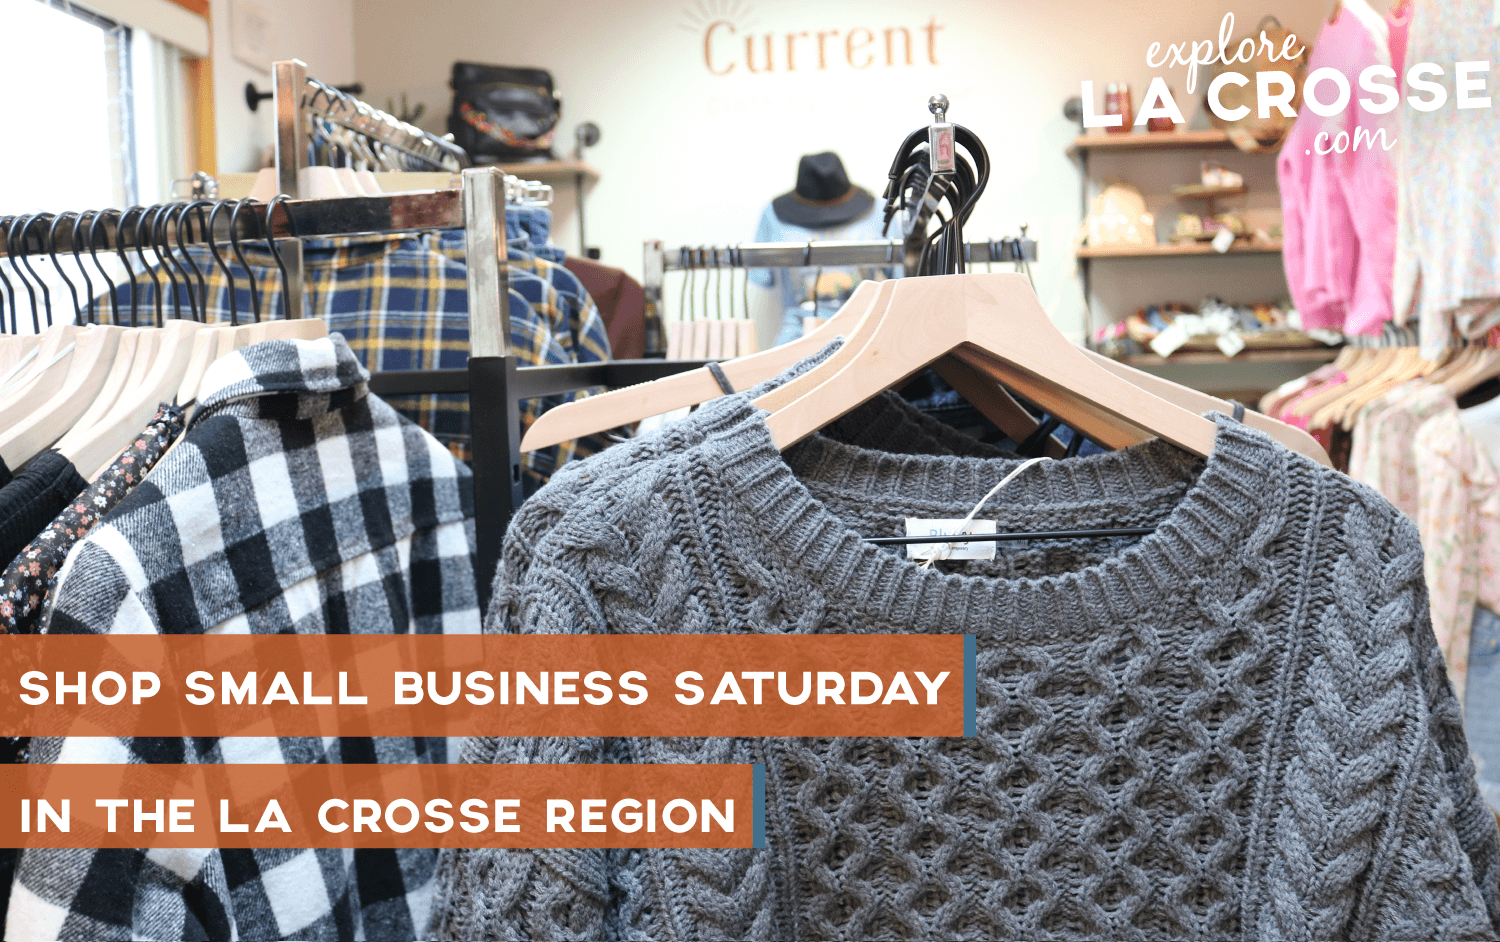 Shop small business saturday